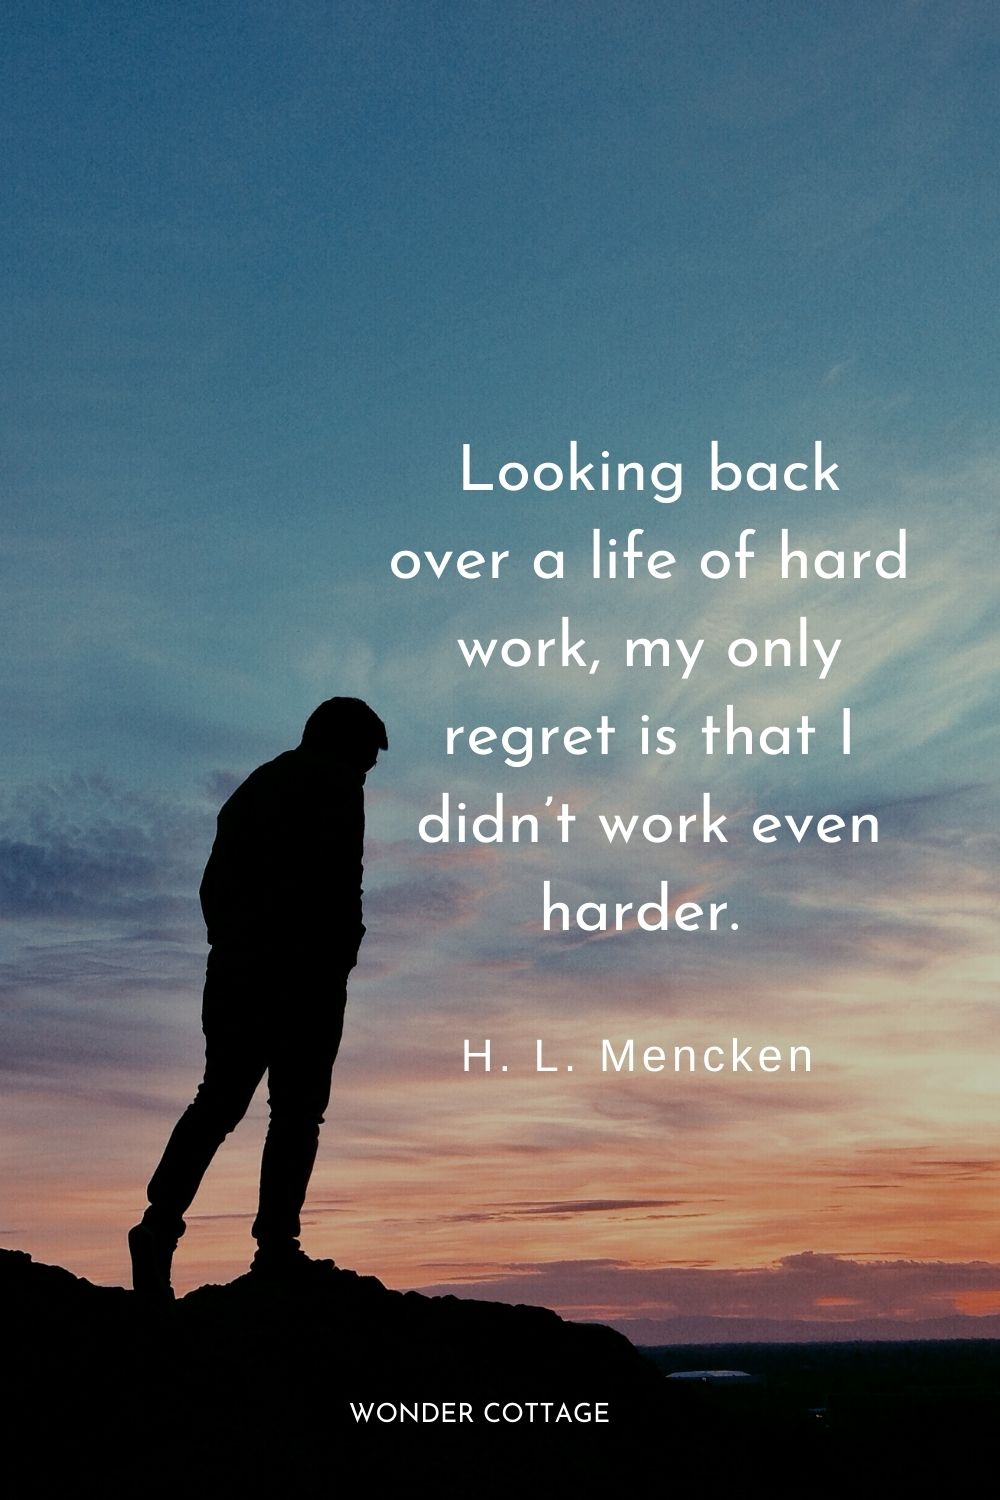 Looking back over a life of hard work, my only regret is that I didn’t work even harder.  H. L. Mencken